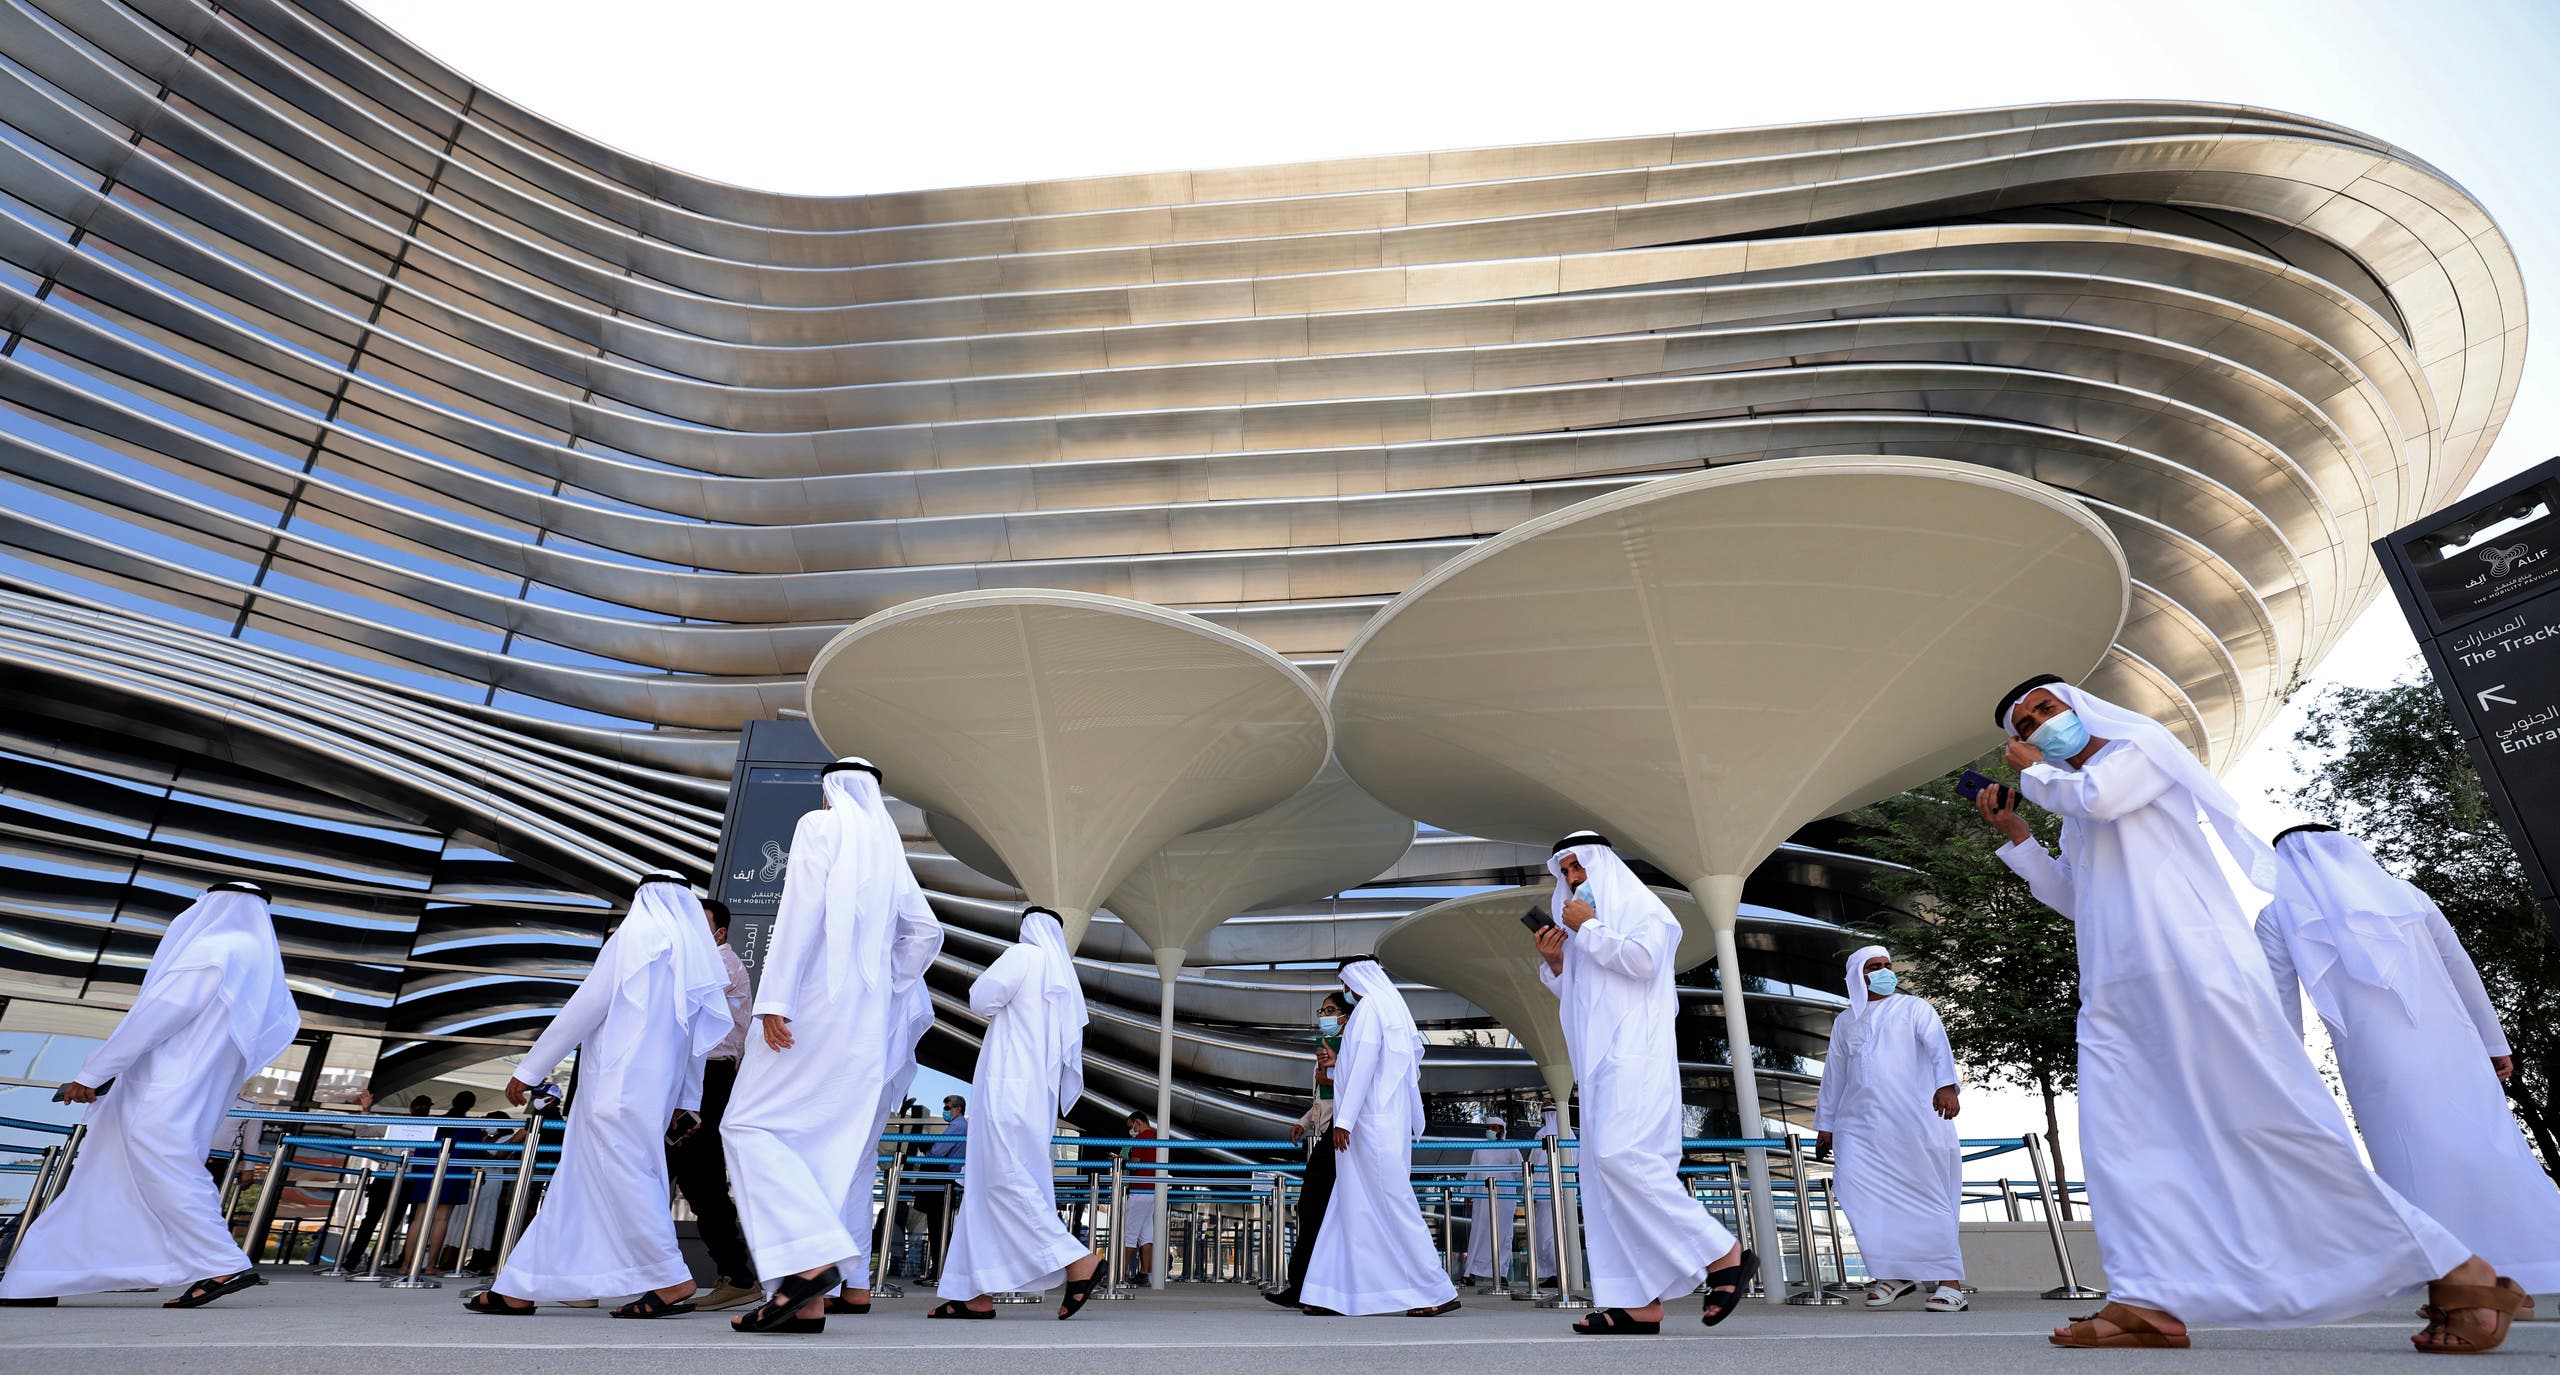 isitors walk outside the Sustainability pavilion at the Expo 2020 in the Gulf Emirate of Dubai on October 6, 2021. (AFP)